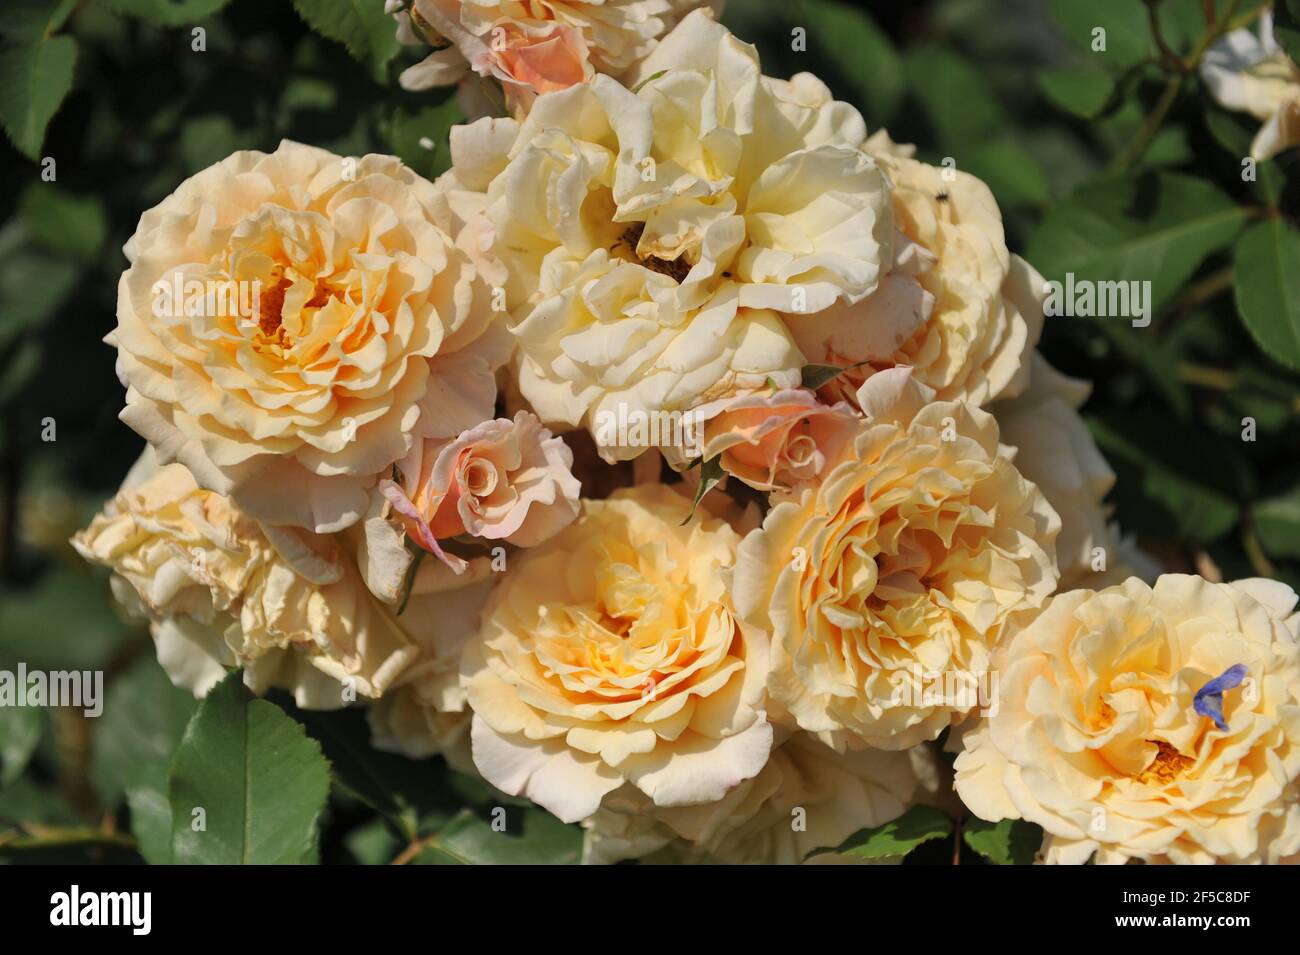 Apricot-yellow with pink undertones Hybrid Tea rose Caramella blooms in a  garden in June Stock Photo - Alamy